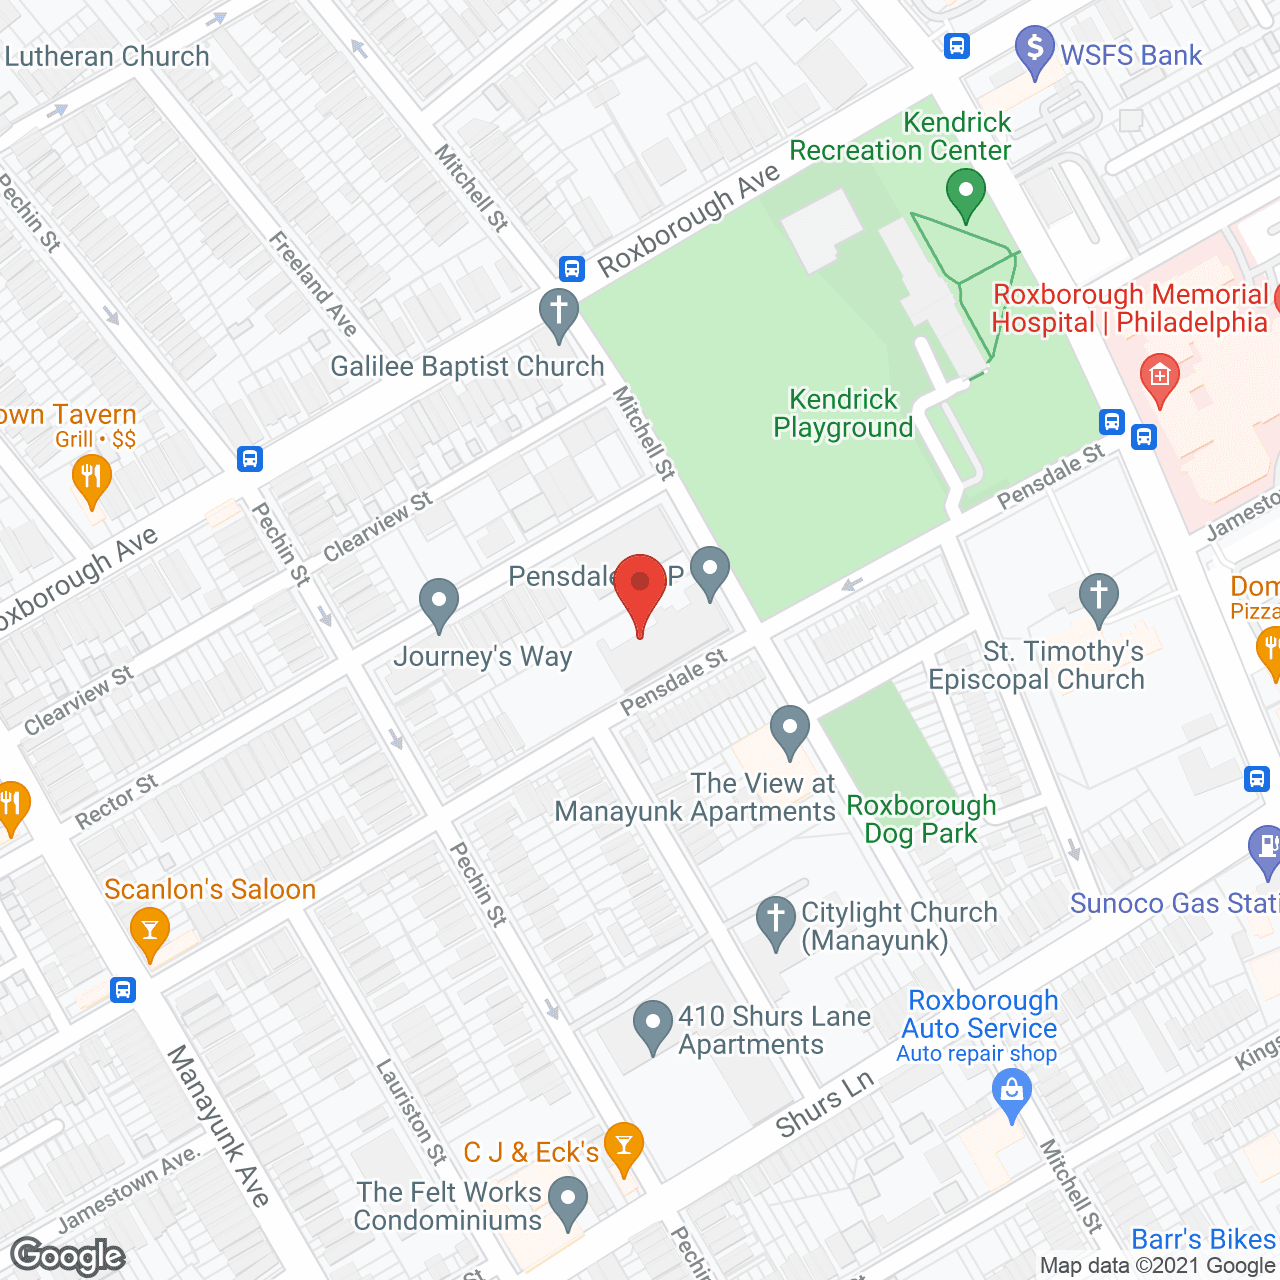 Adult Day Service Center at Journey's Way in google map